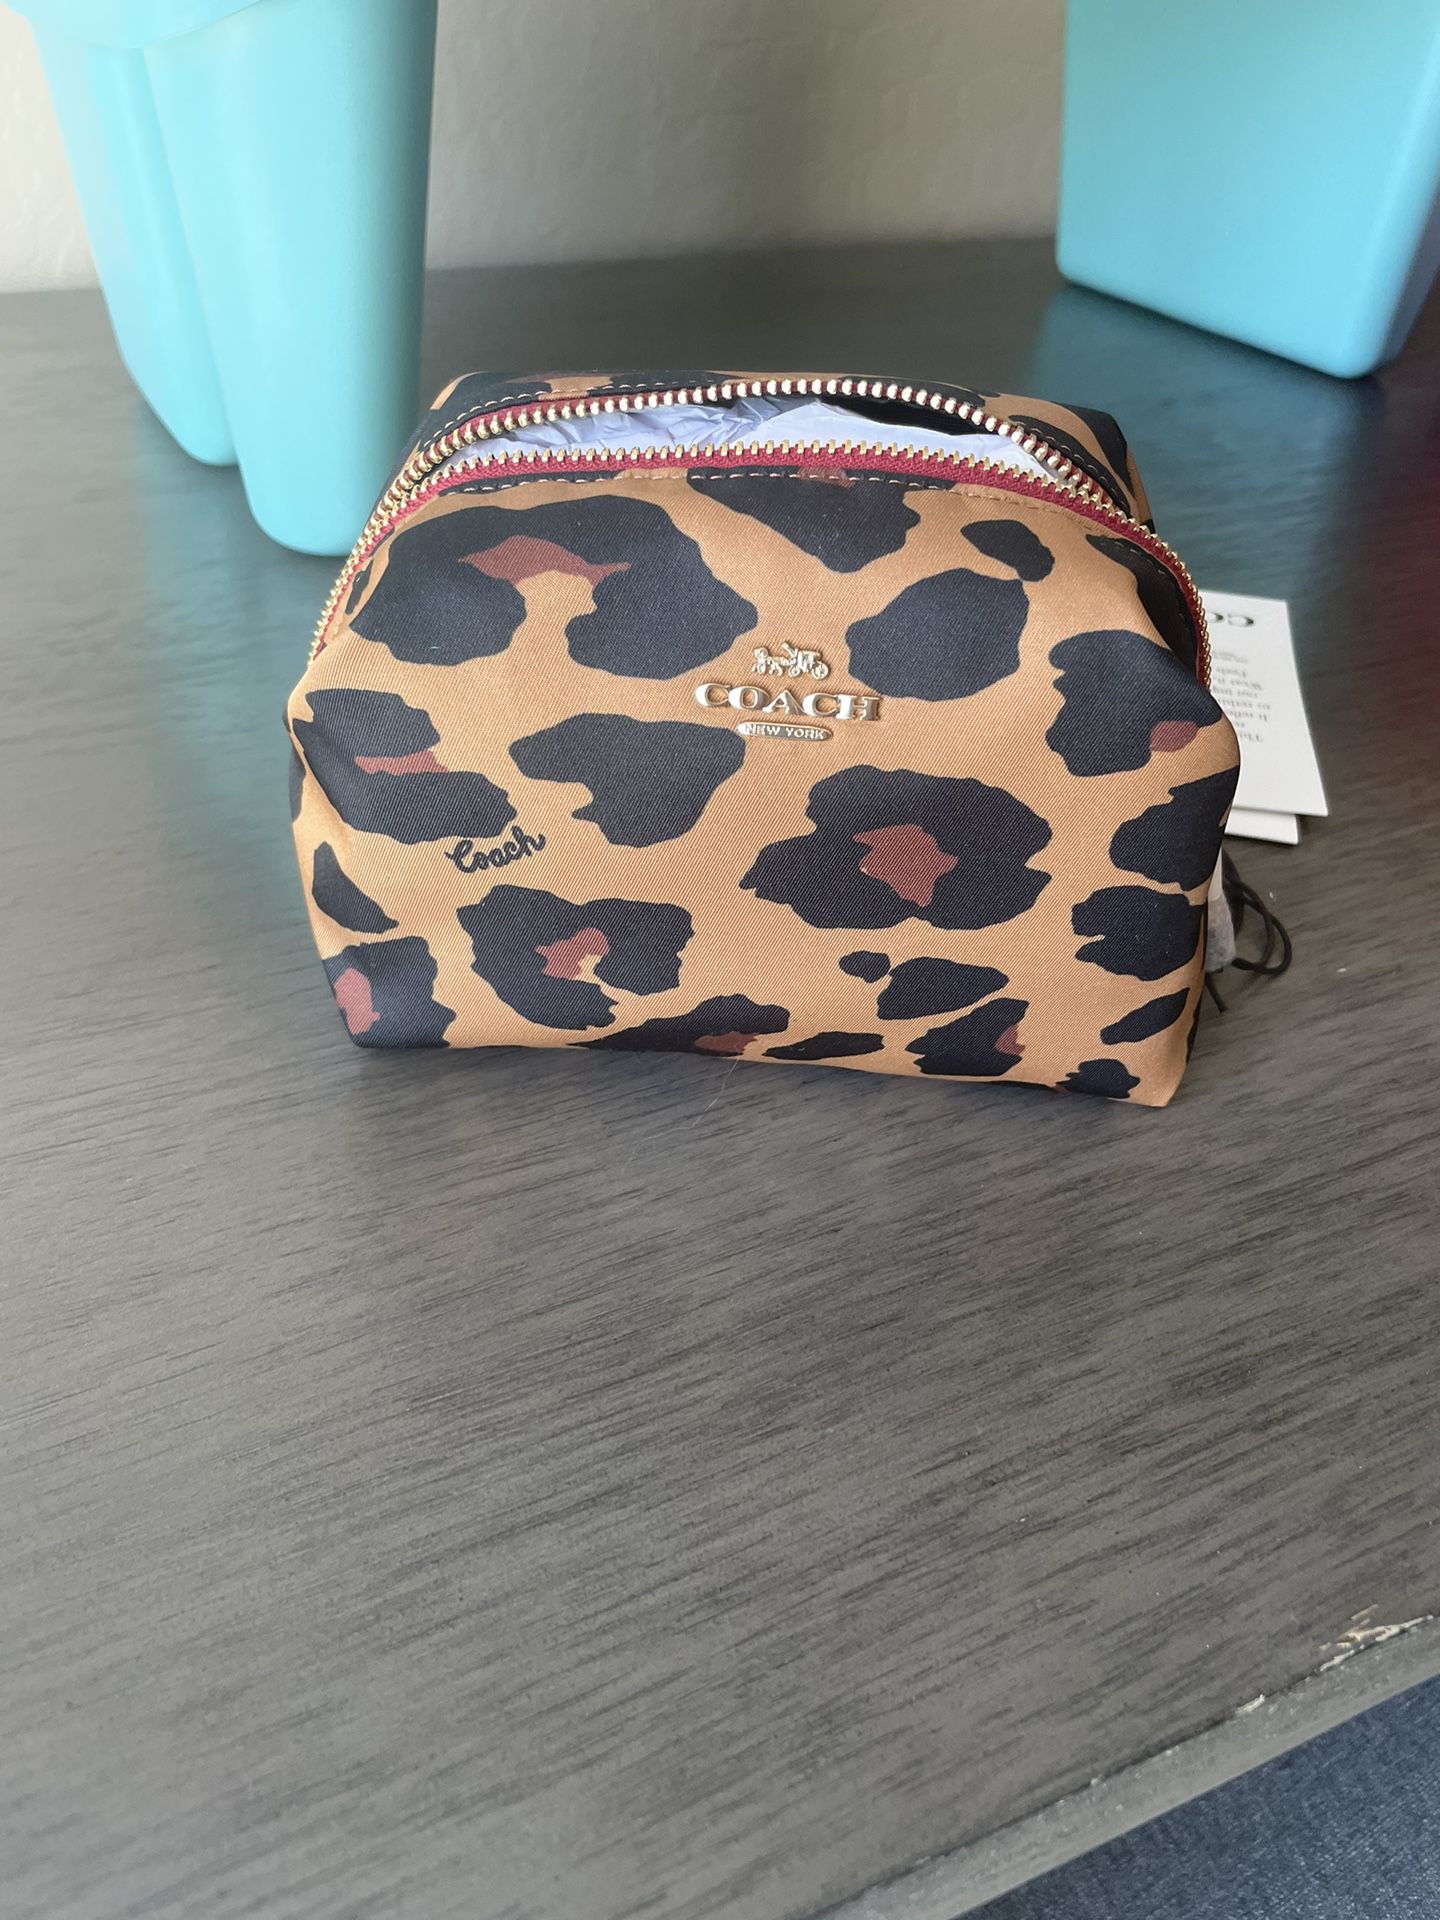 Poopsie Pooey Puitton Carrying Case / Purse for Sale in Phoenix, AZ -  OfferUp